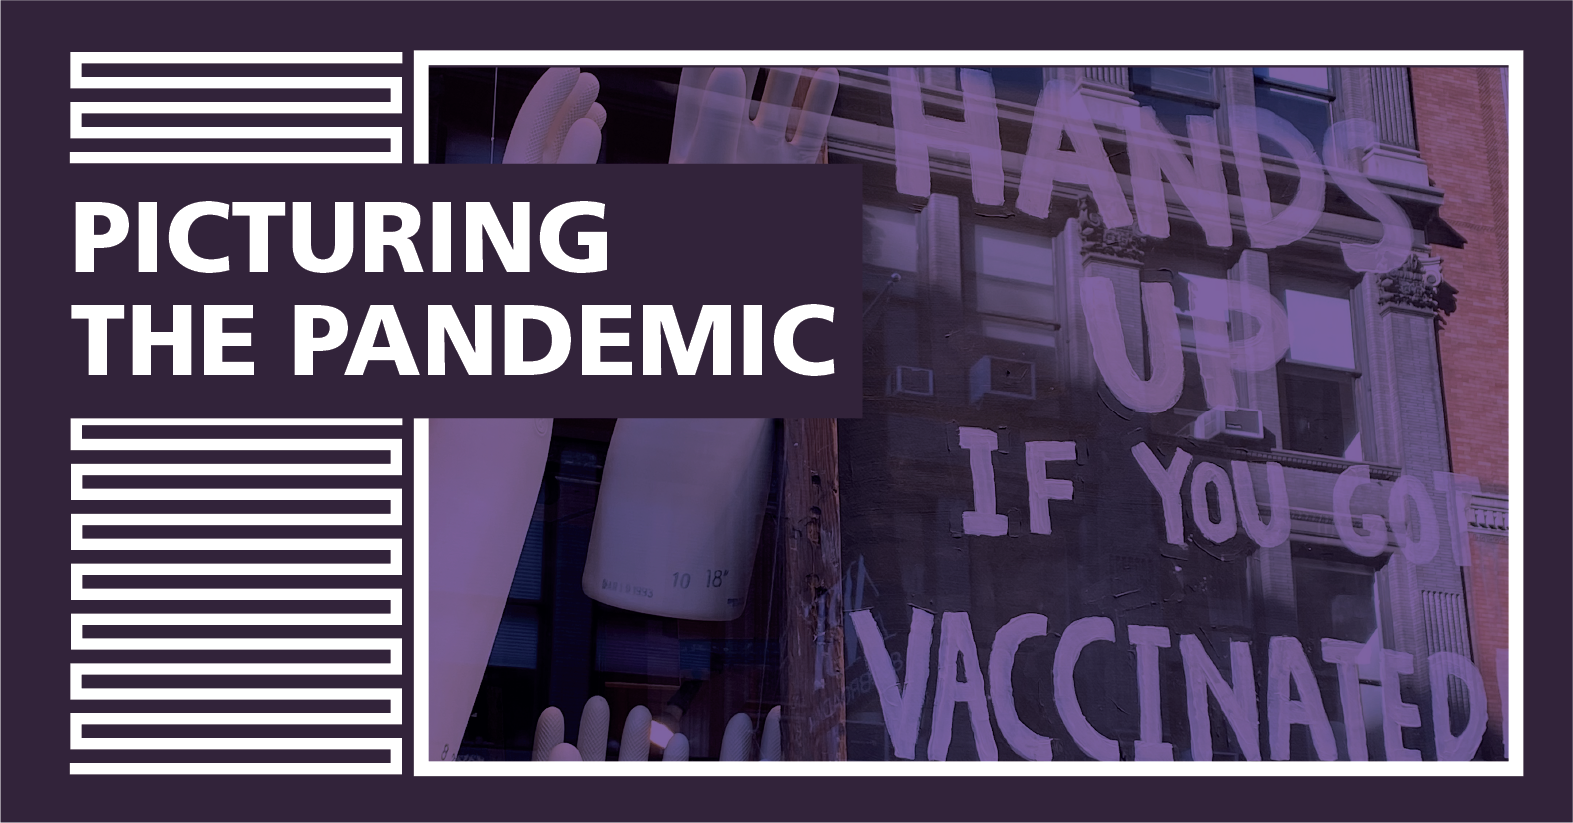 Picturing the Pandemic